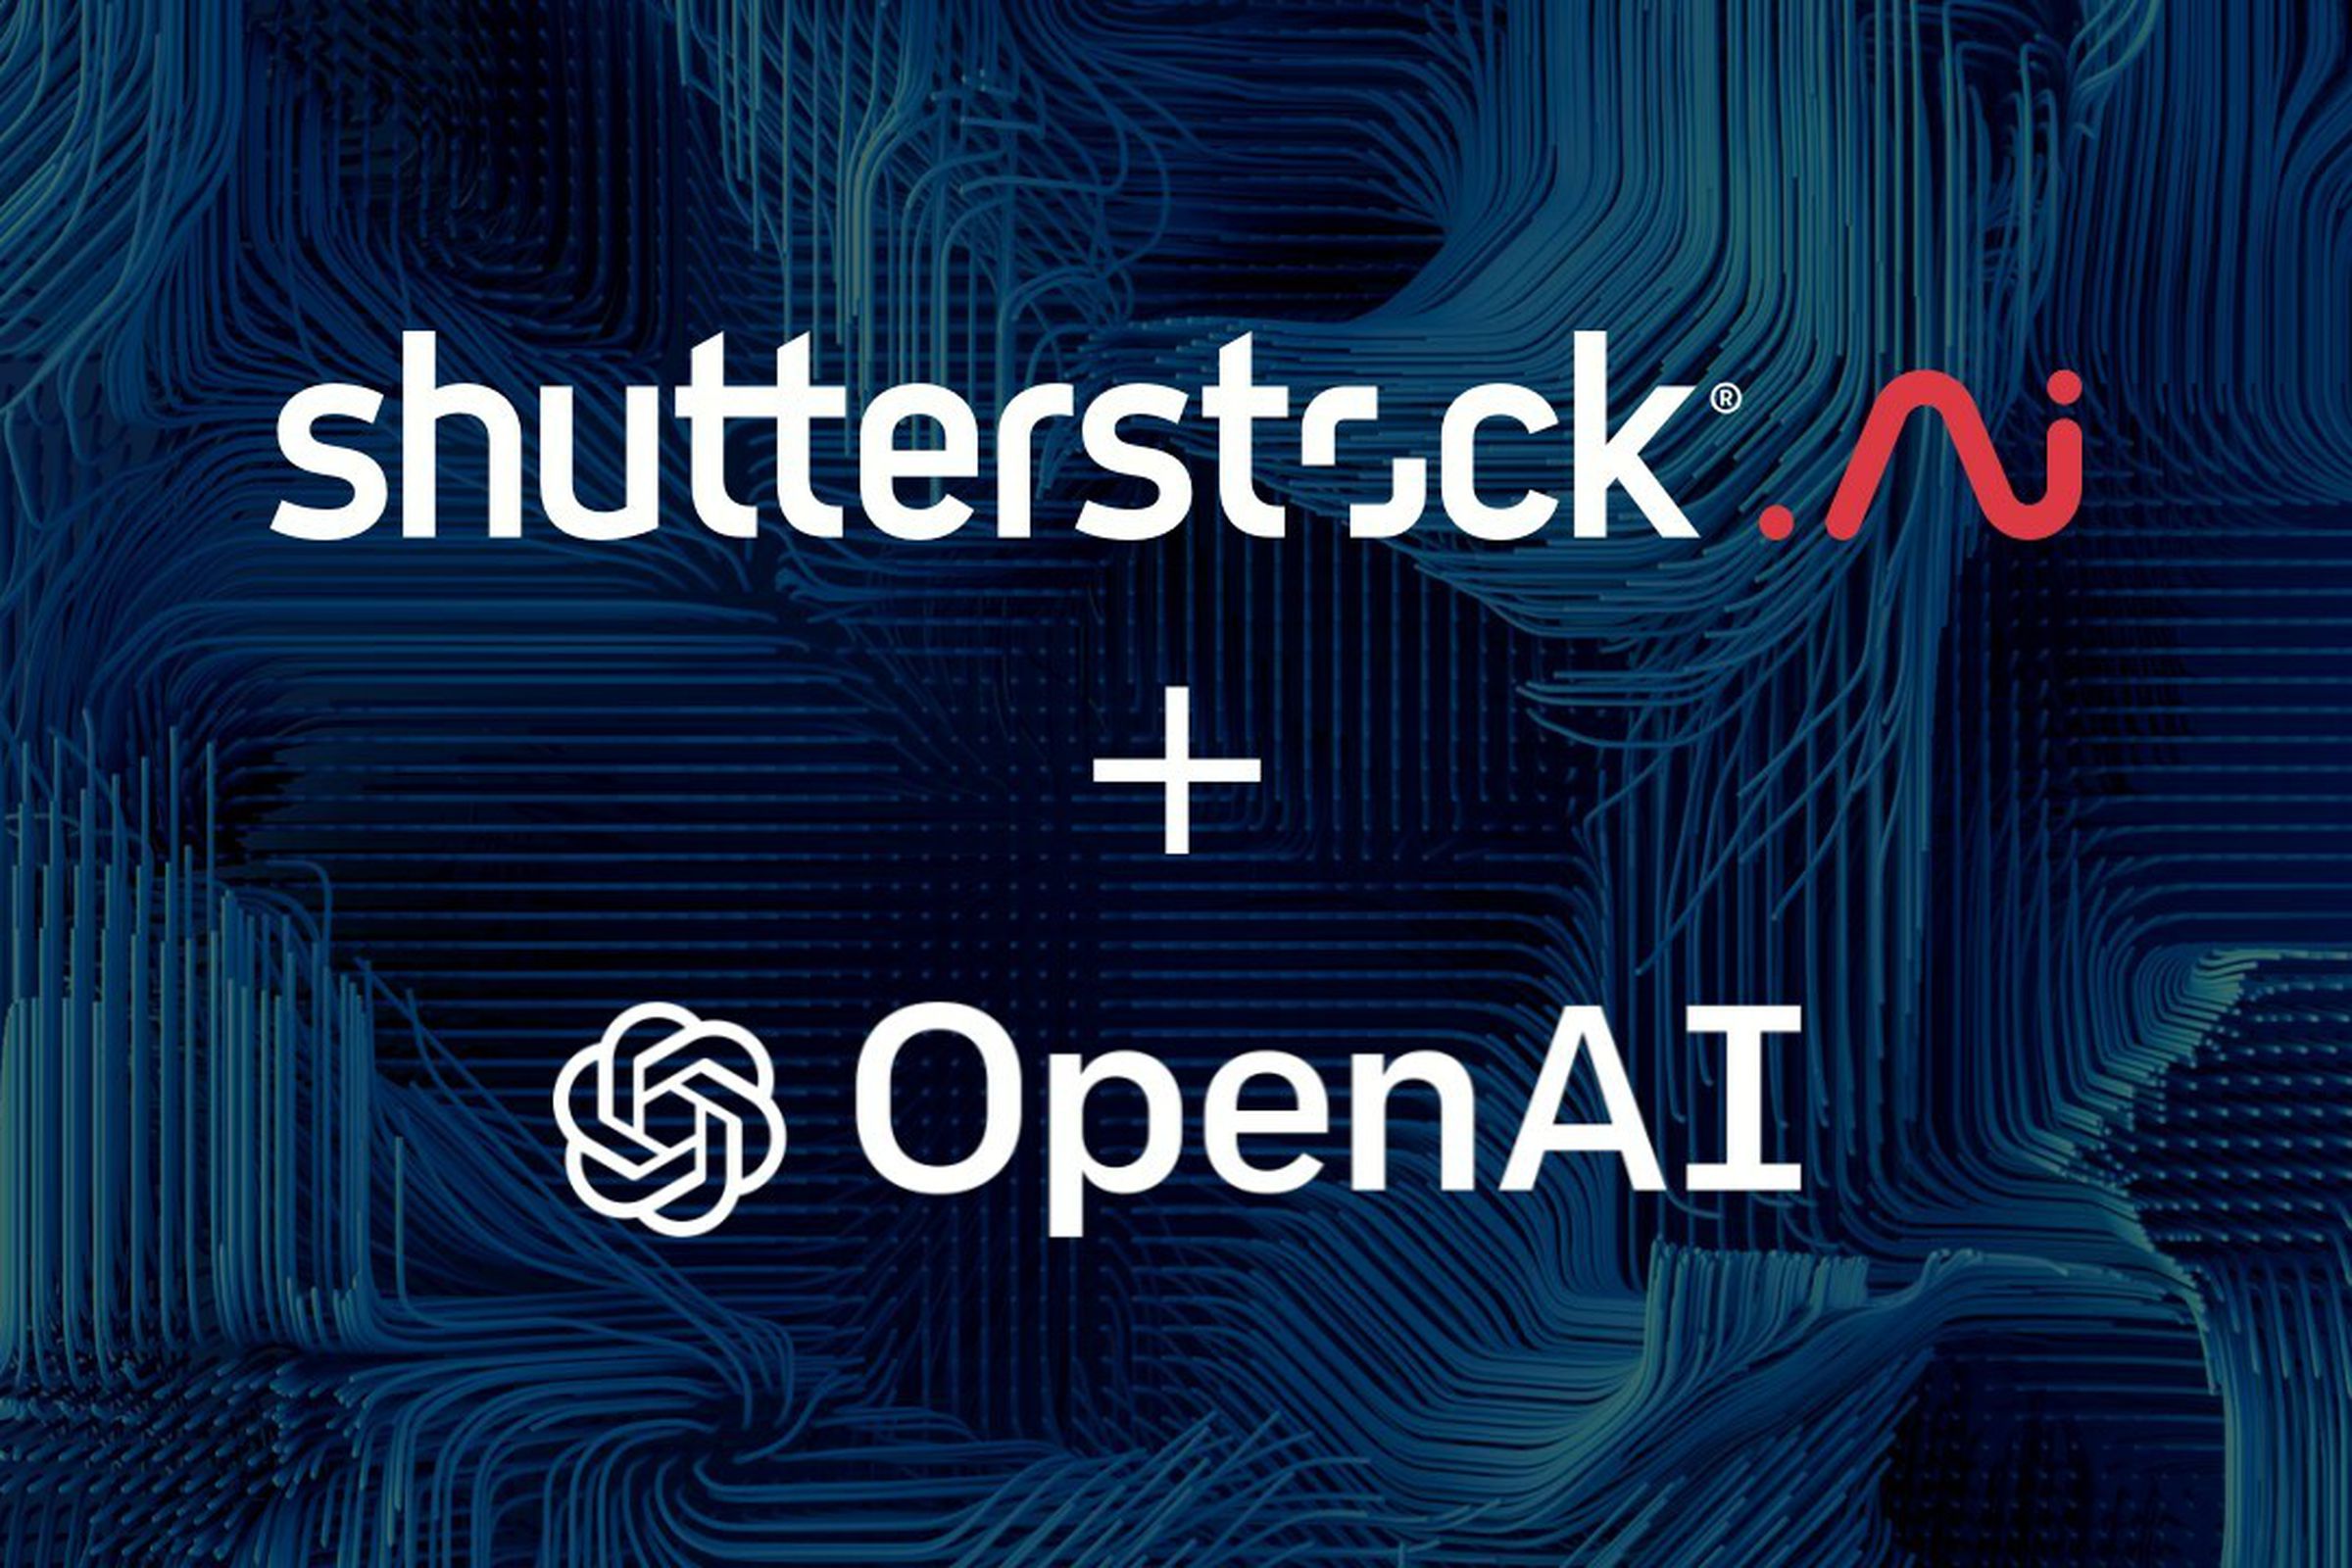 An image showing the Shutterstock and OpenAI logos